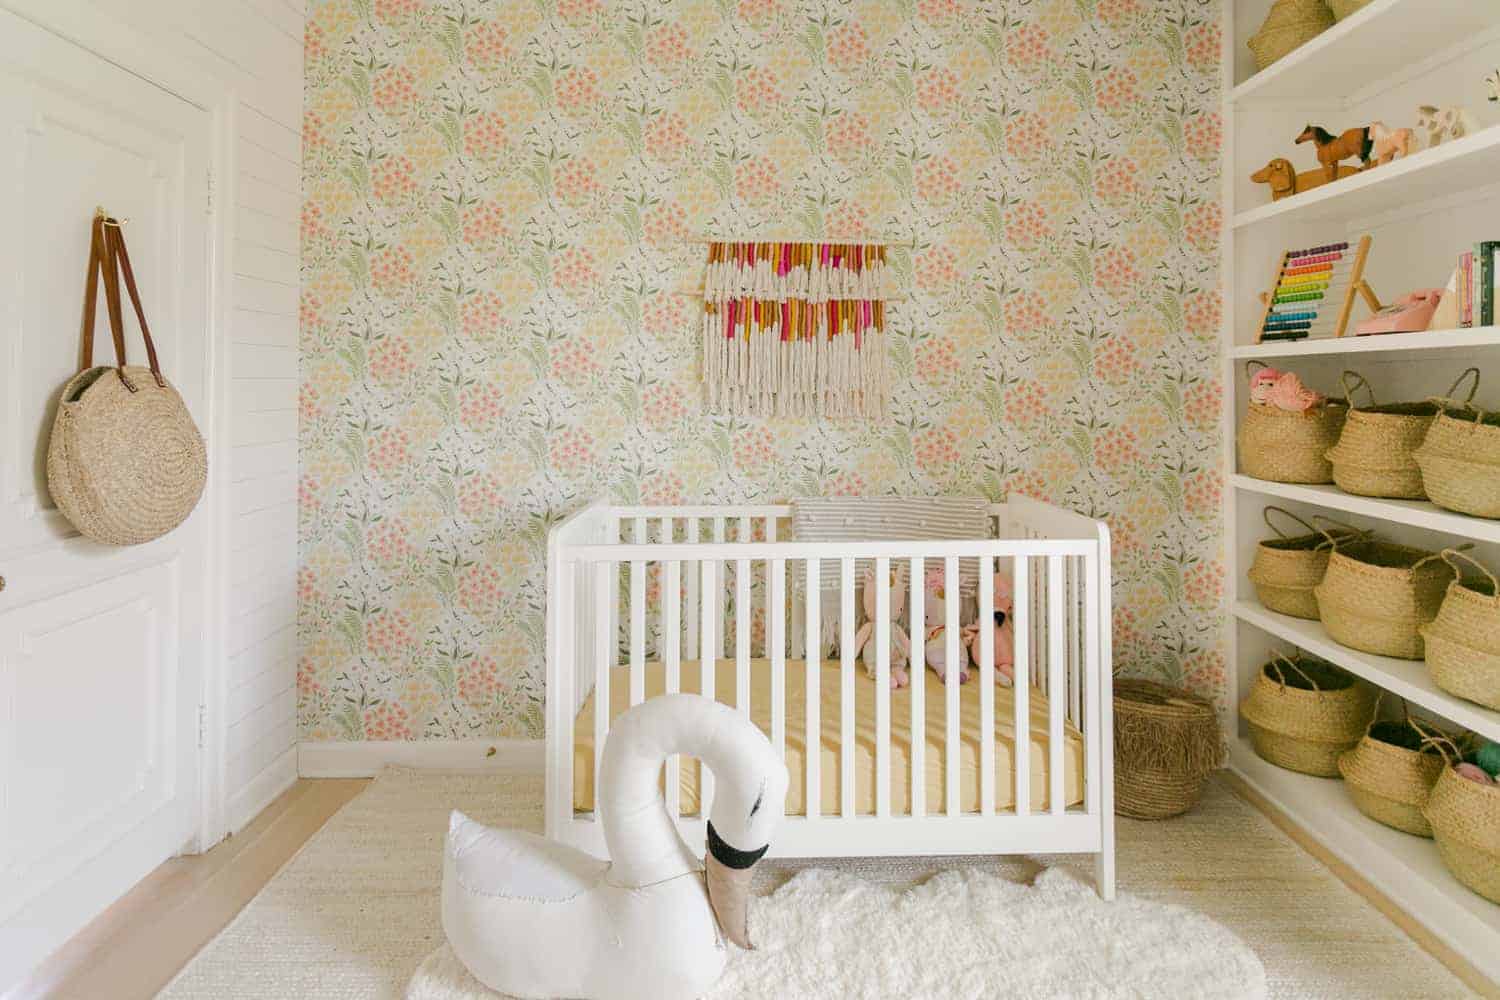 Bright and cute kids room